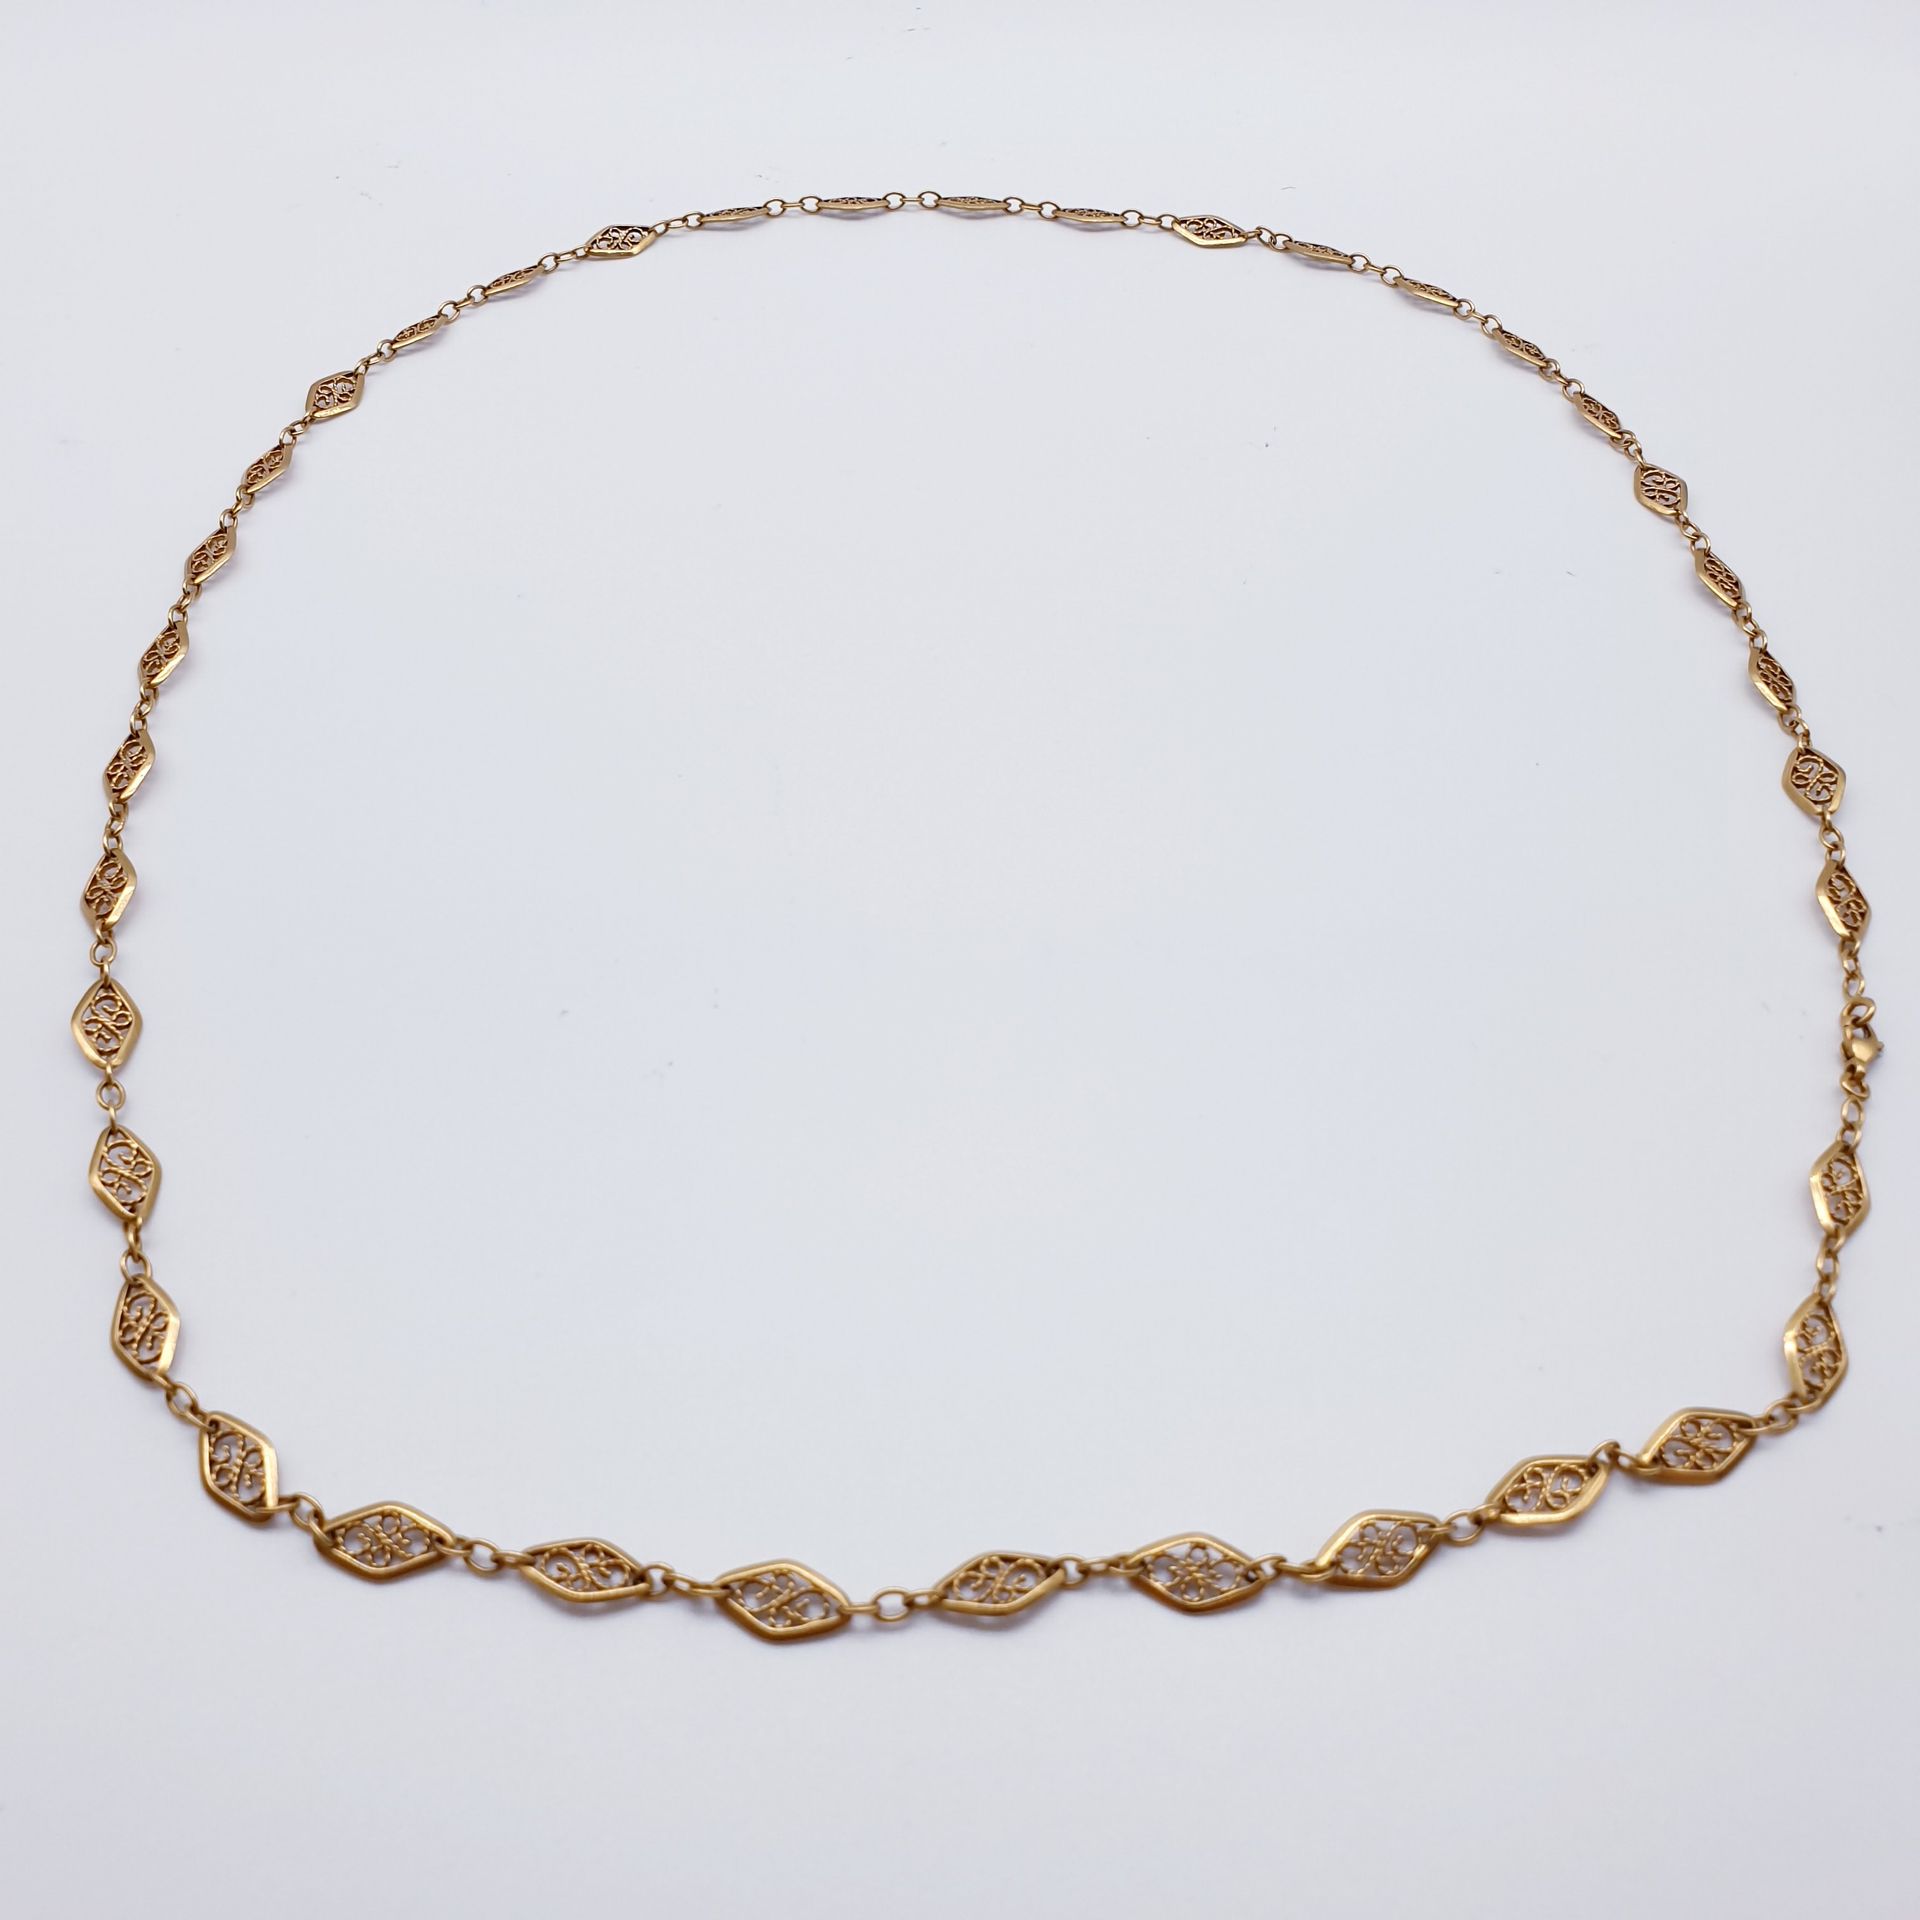 Null Necklace in yellow gold 750° filigree mesh

weight : 12,21g